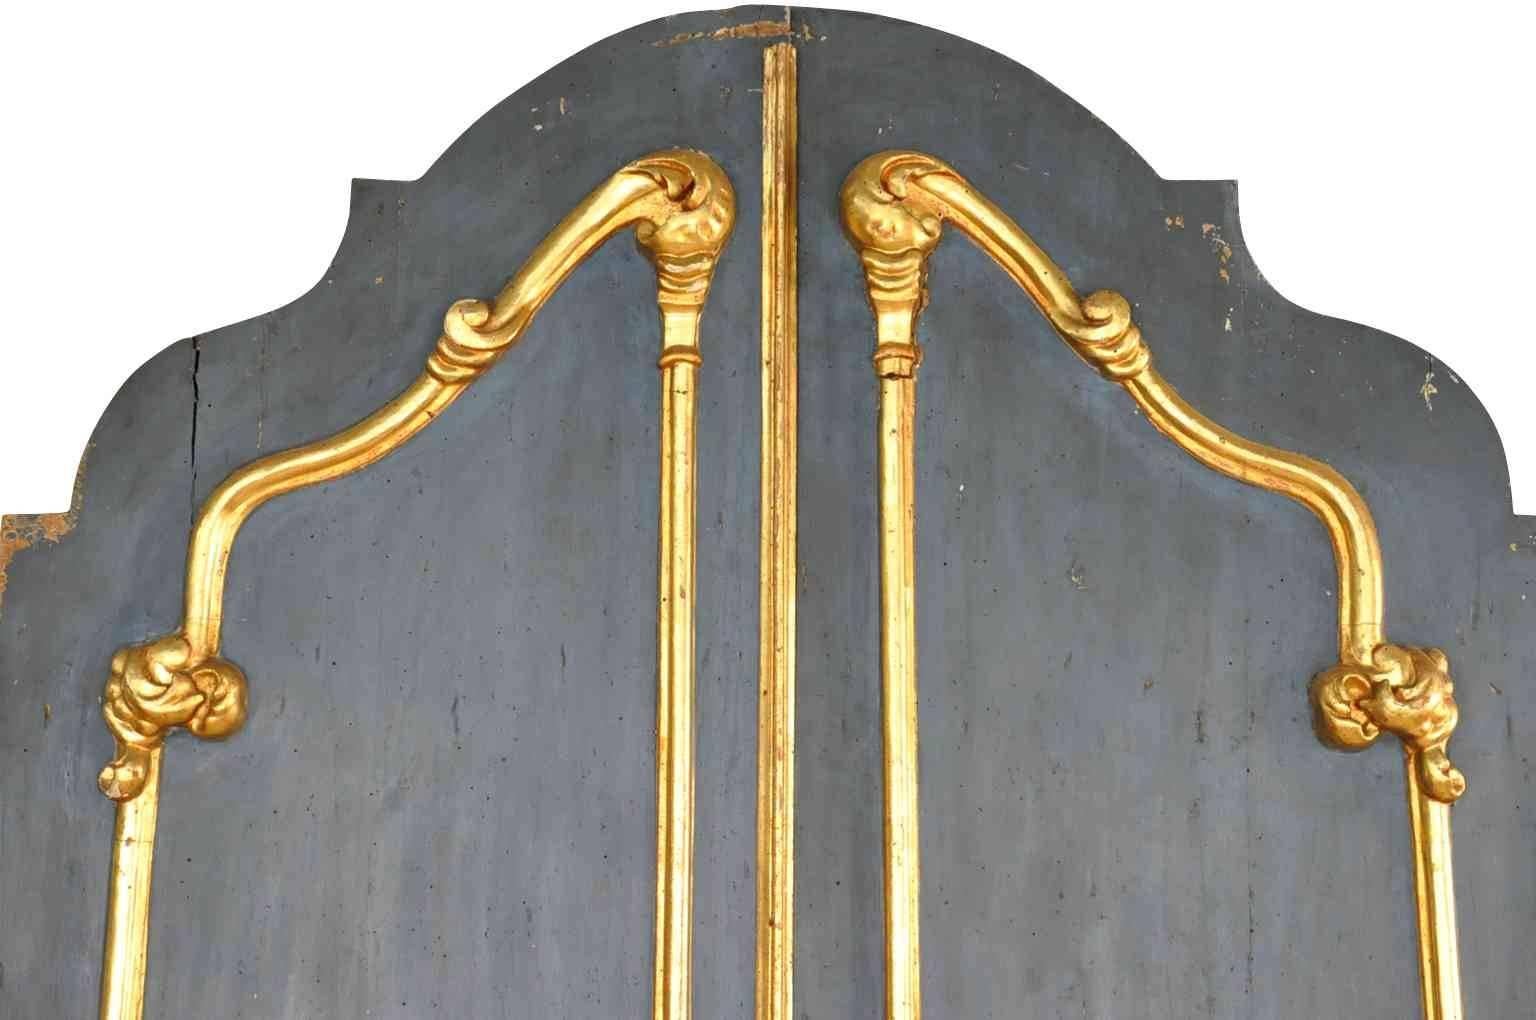 A sensational pair of Italian 18th century doors in gilt and polychromed wood. Beautifully shaped with a sculpted arch. The rich and vibrant blue color is so inviting. A fabulous architectural accent to lend elegance and charm.